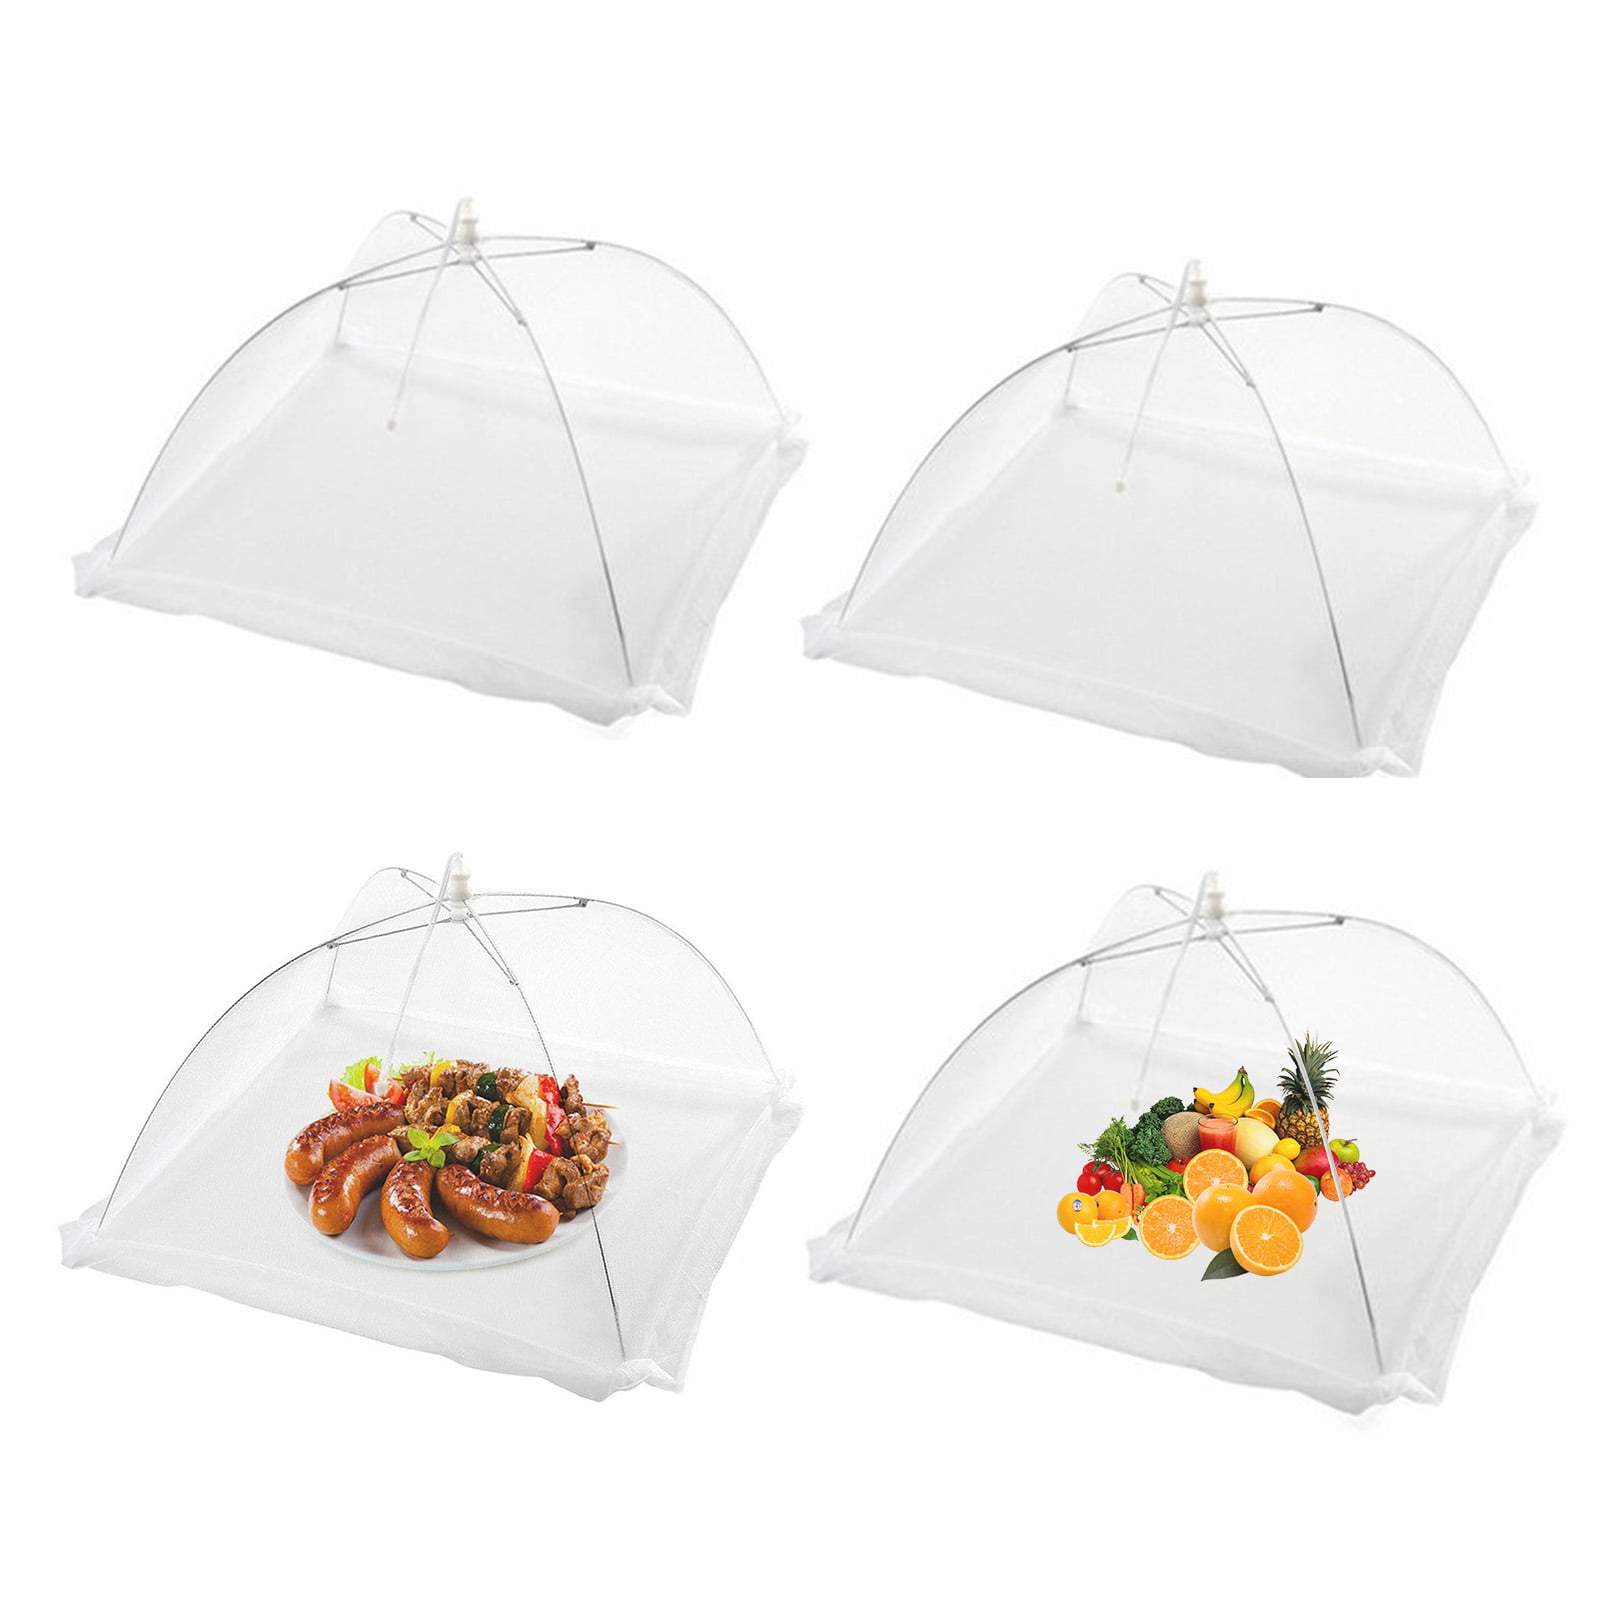 Keep Bugs Out Details about   6pk Pop-Up 17x17 Large Outdoor Food Covers 